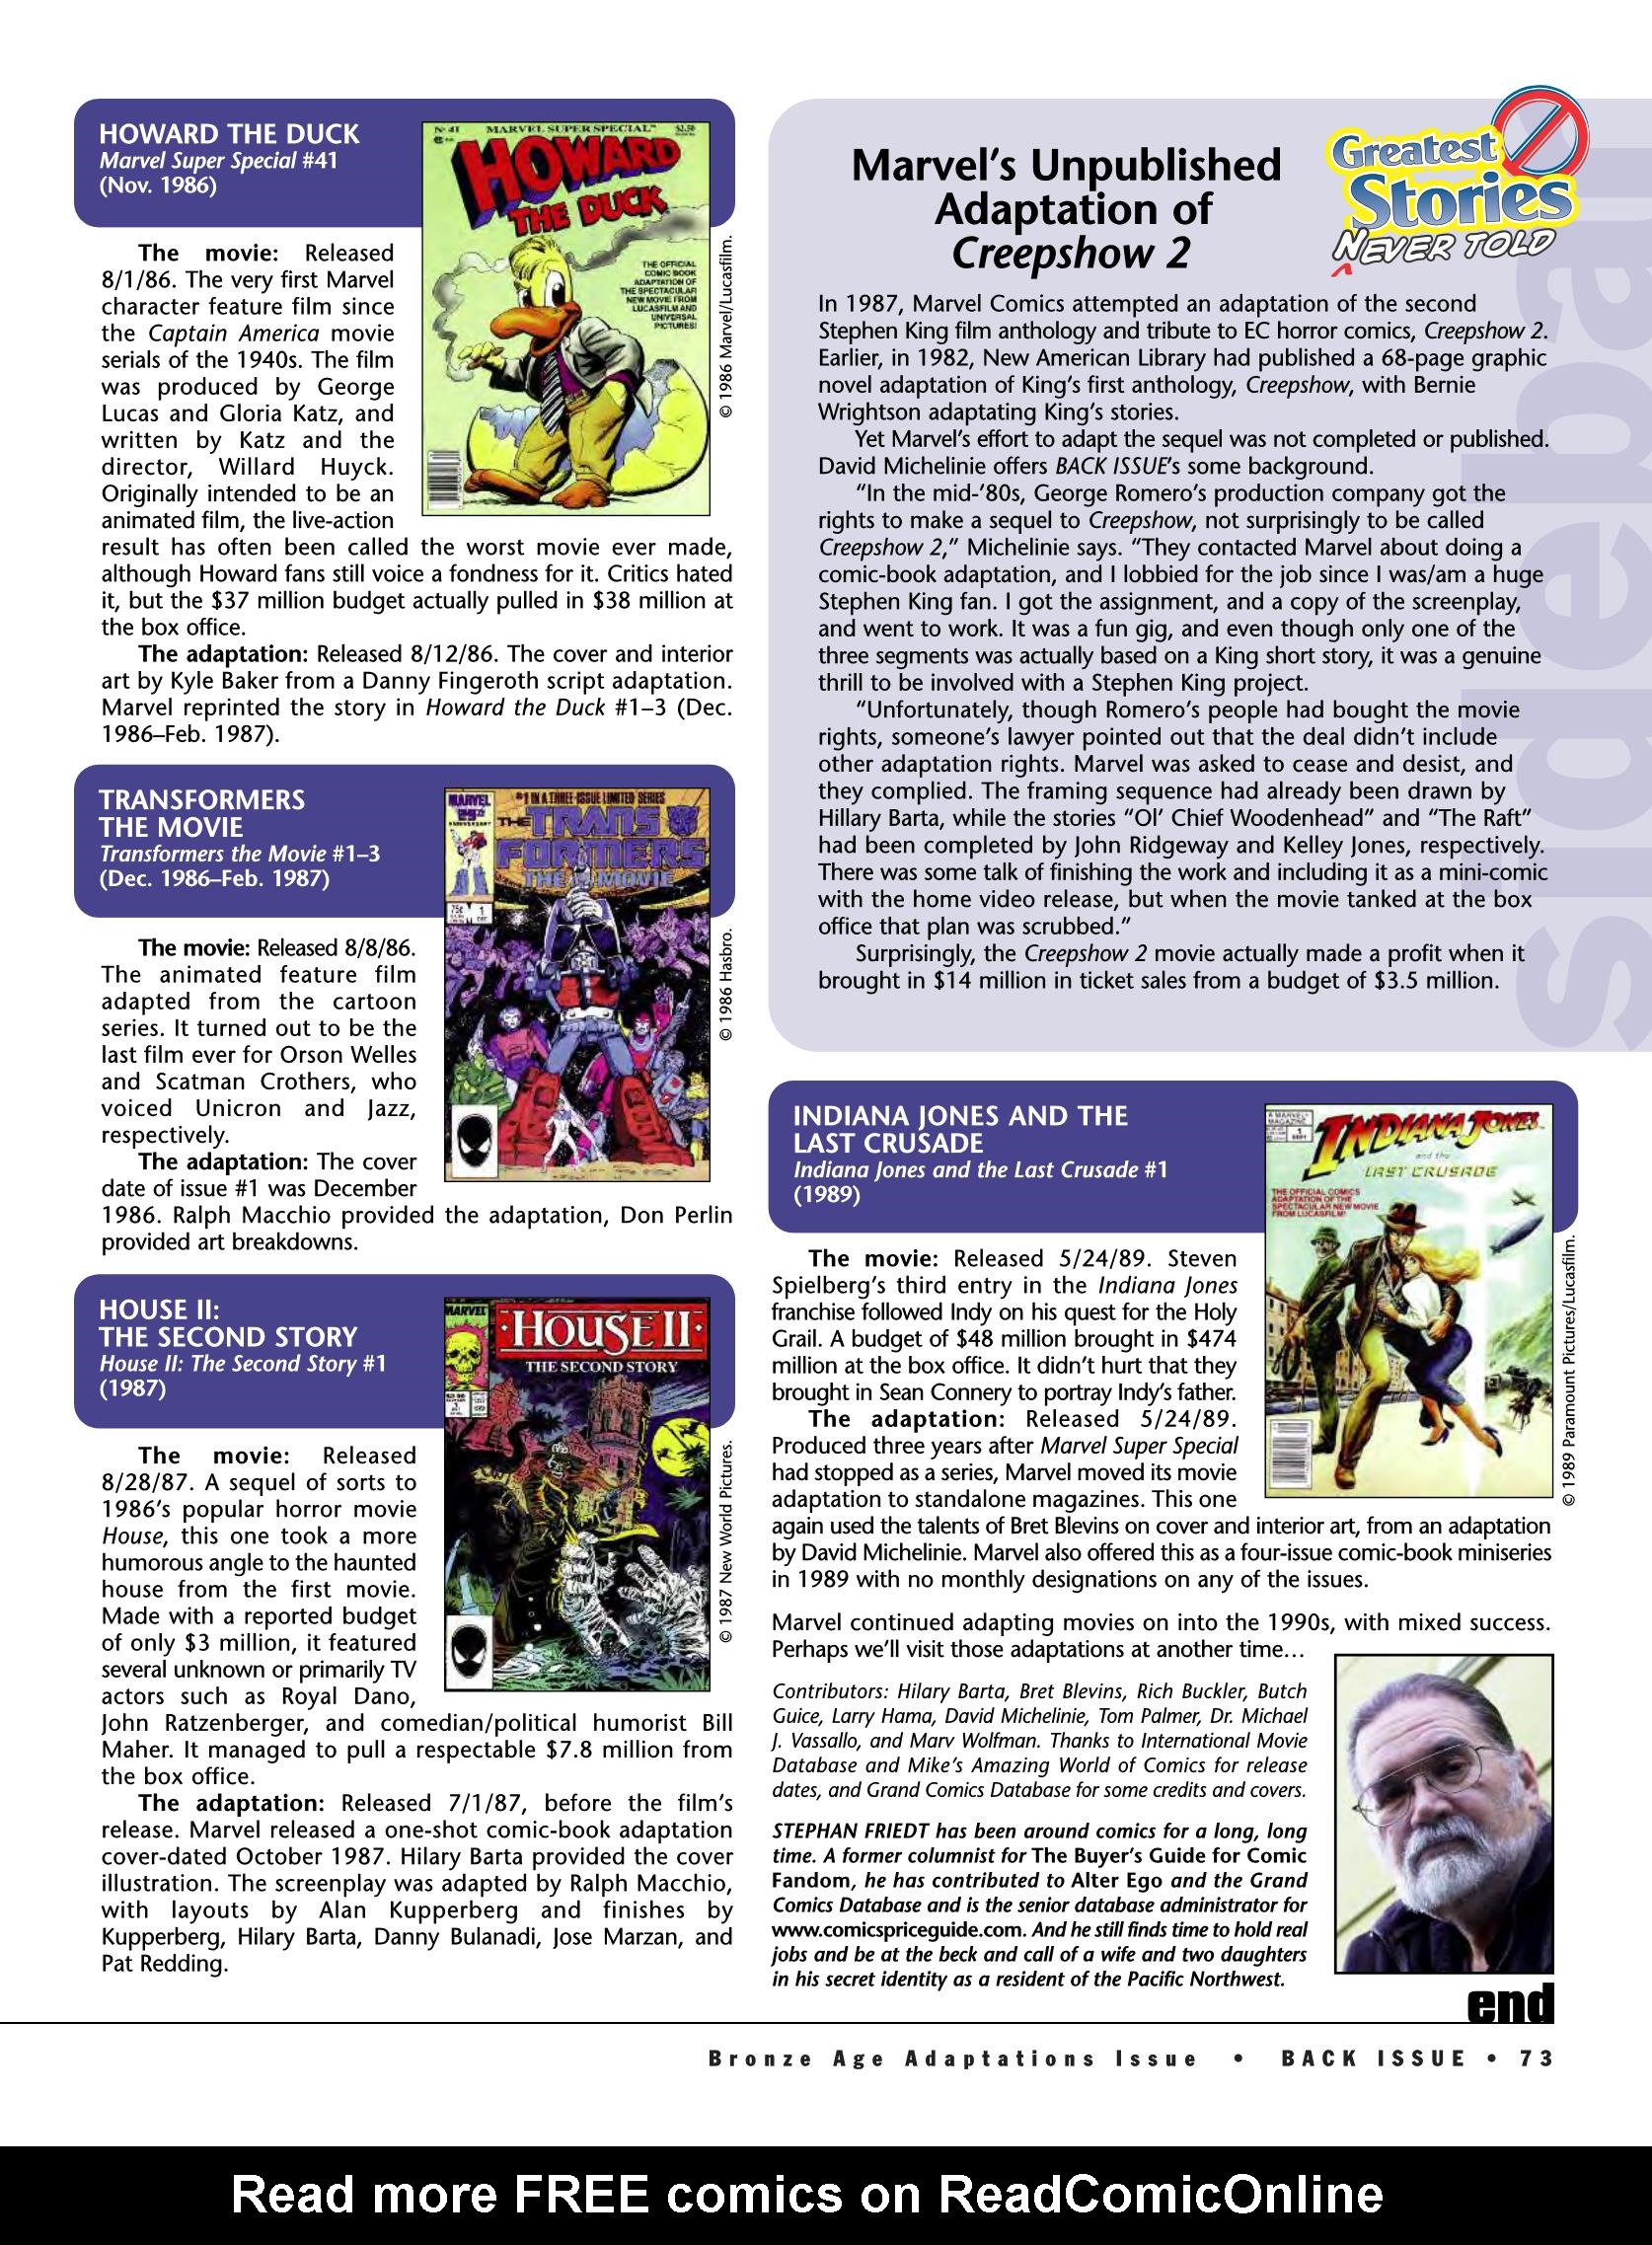 Read online Back Issue comic -  Issue #89 - 73